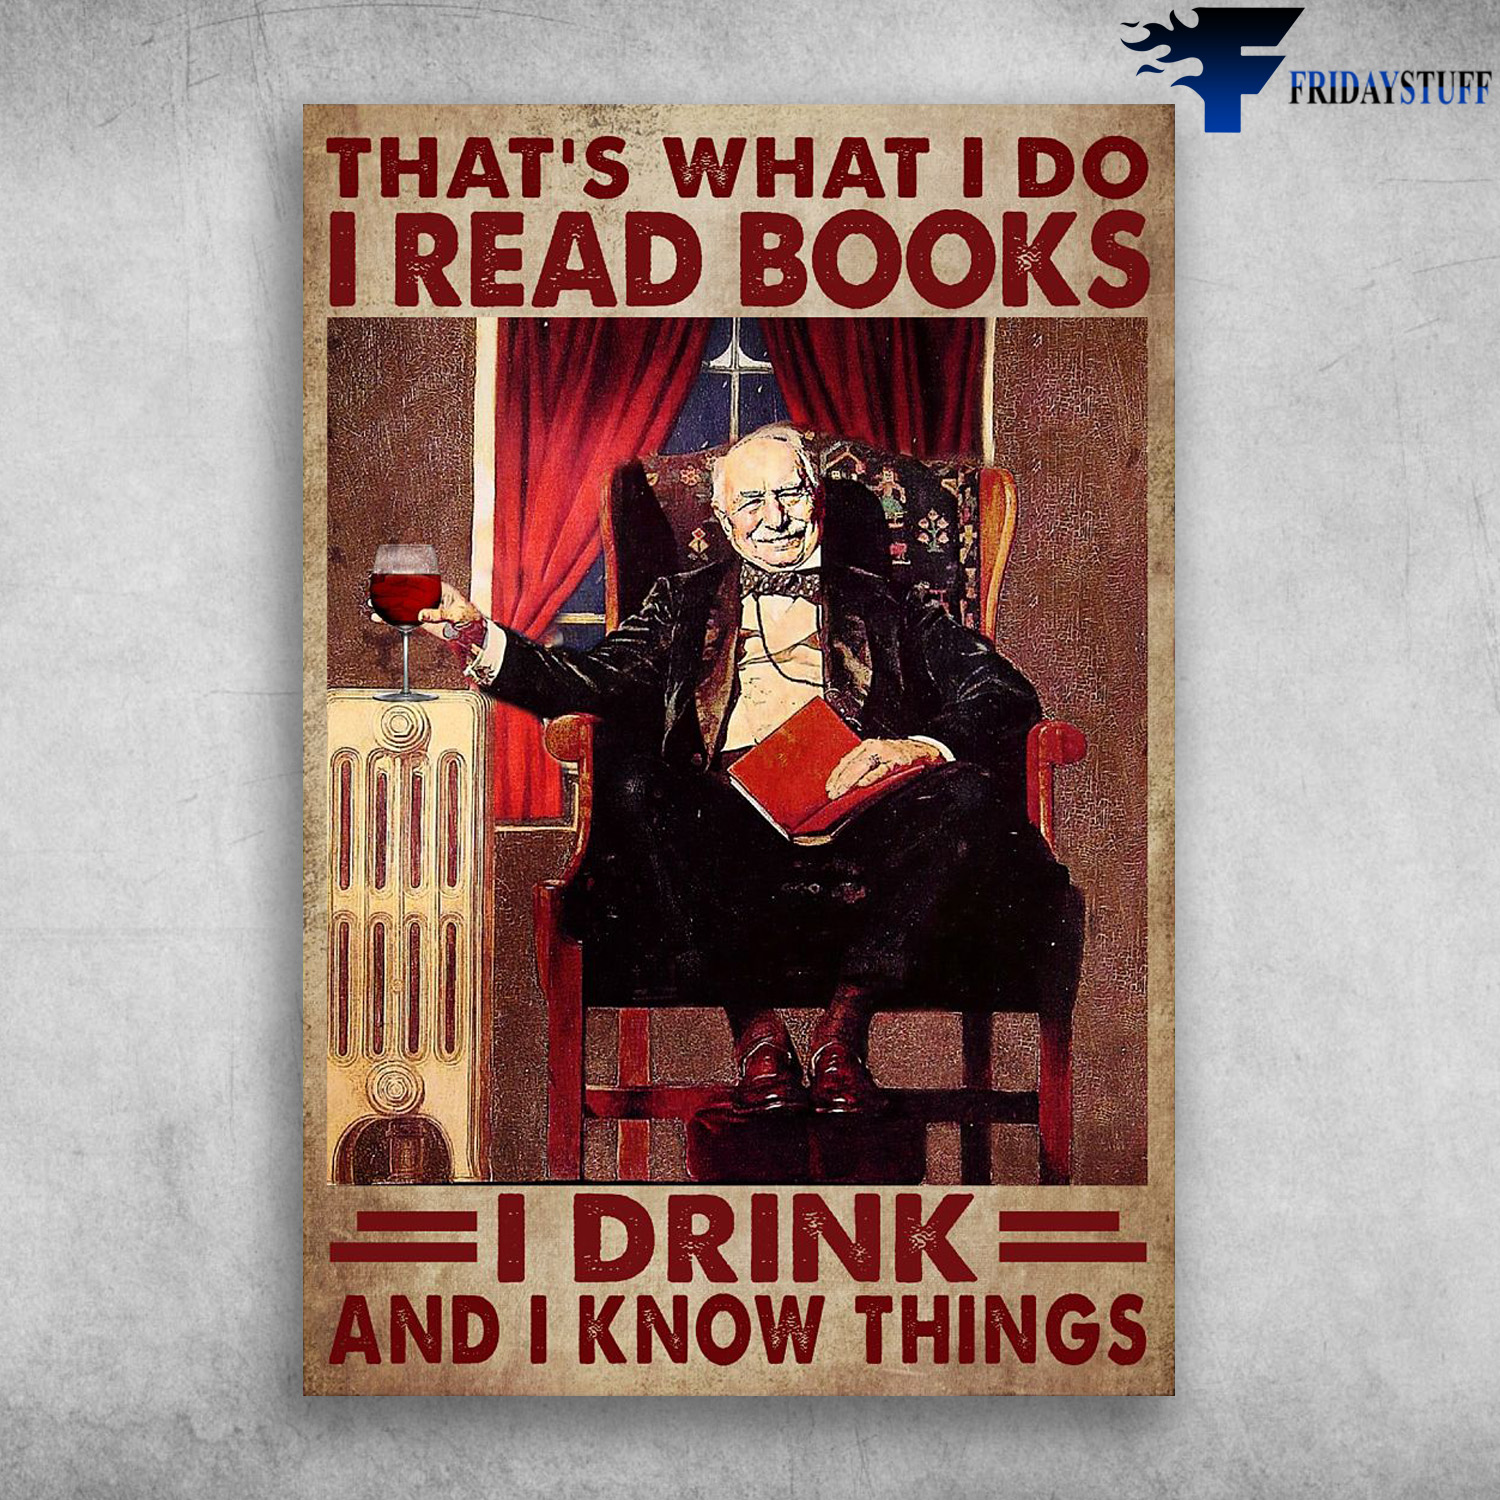 Old Man Reads Book With Wine - That's What I Do, I Read Books, I Drink And I Know Things